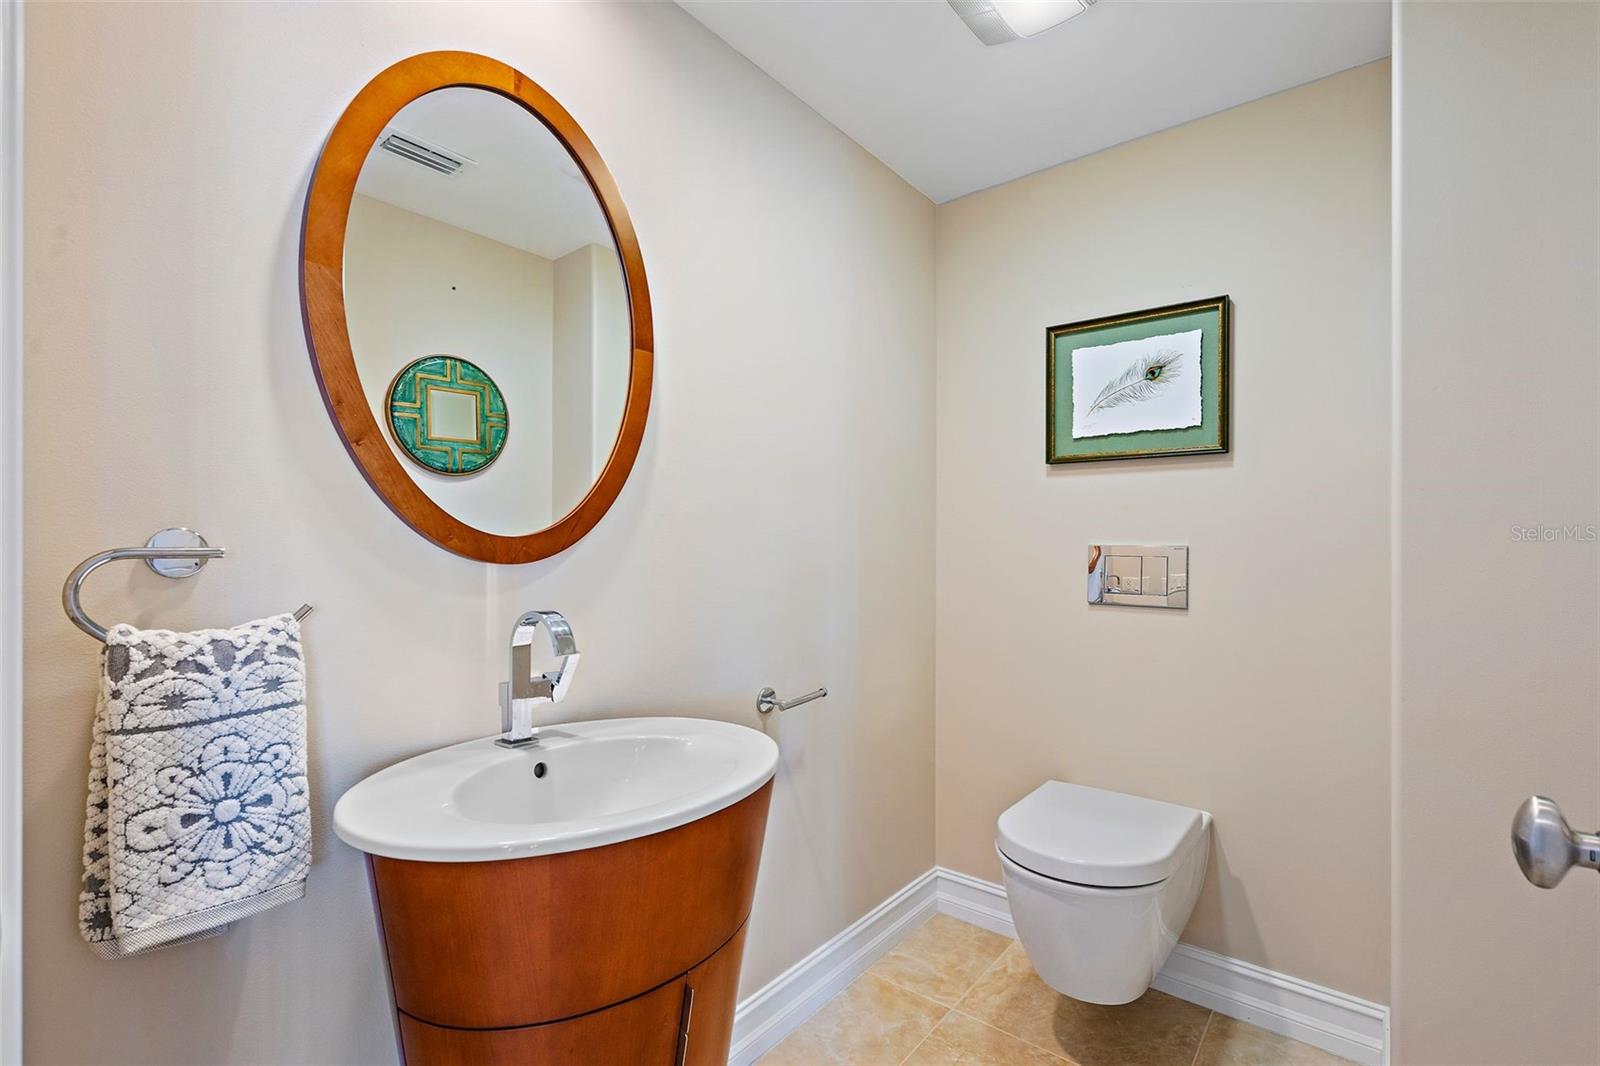 The half bath has a hanging toilet, which makes cleaning a breeze! It also looks fabulous!